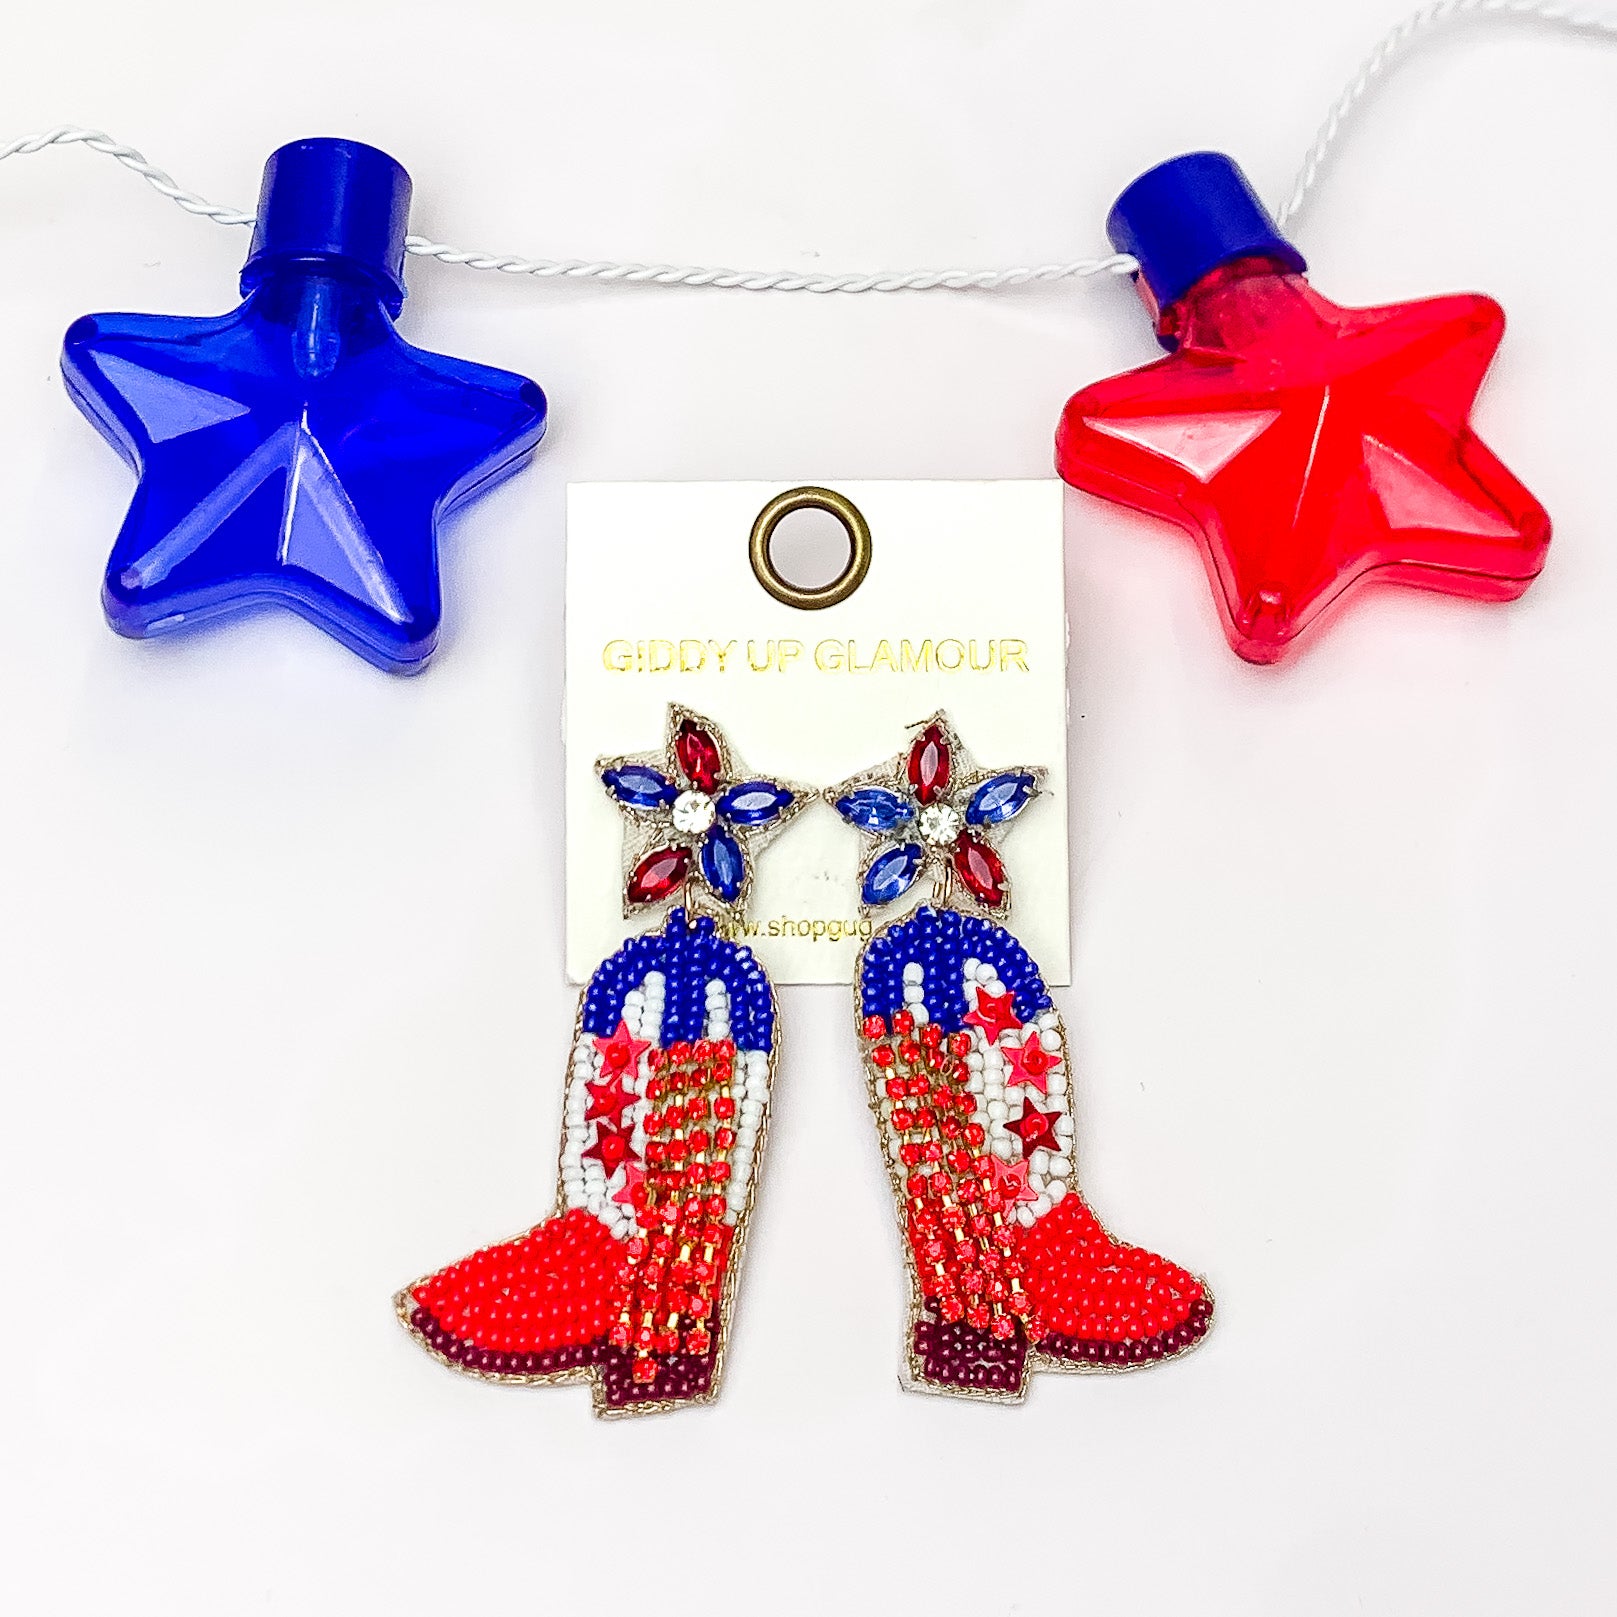 Patriotic Beaded Boot Earrings with Blue and Red Crystals - Giddy Up Glamour Boutique